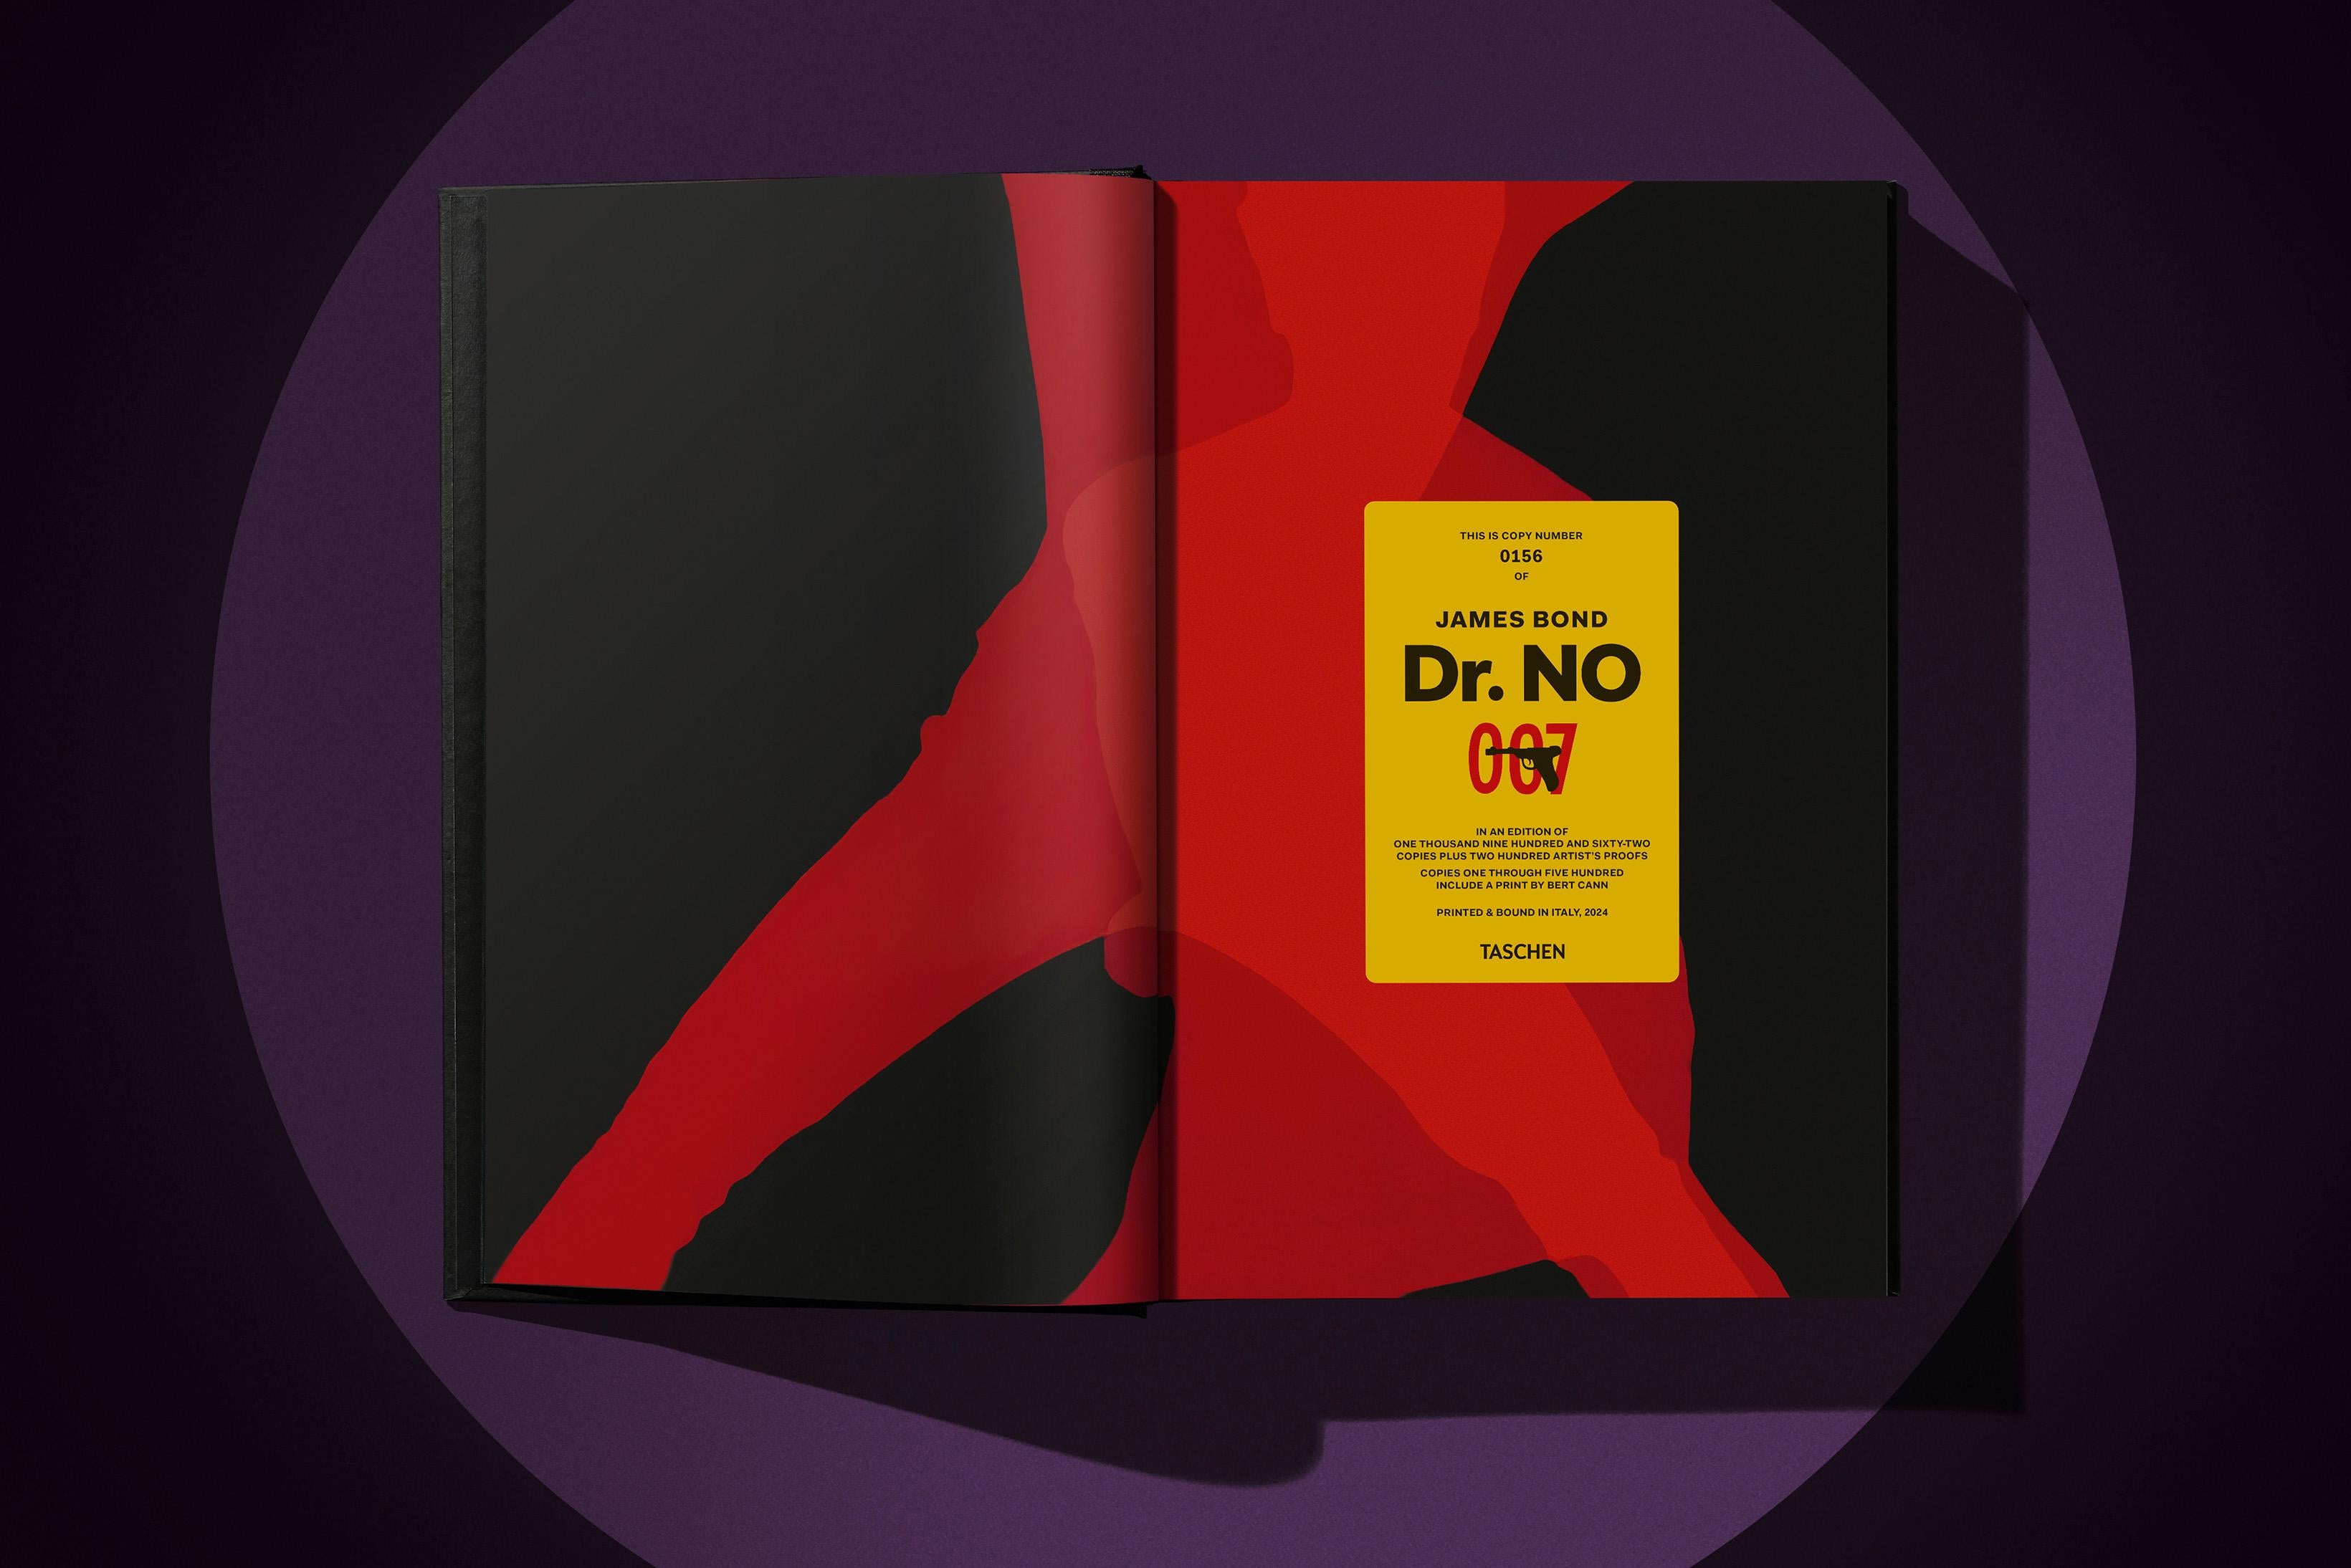 James Bond. Dr. No. Limited Edition Collector's Book. im Angebot 5